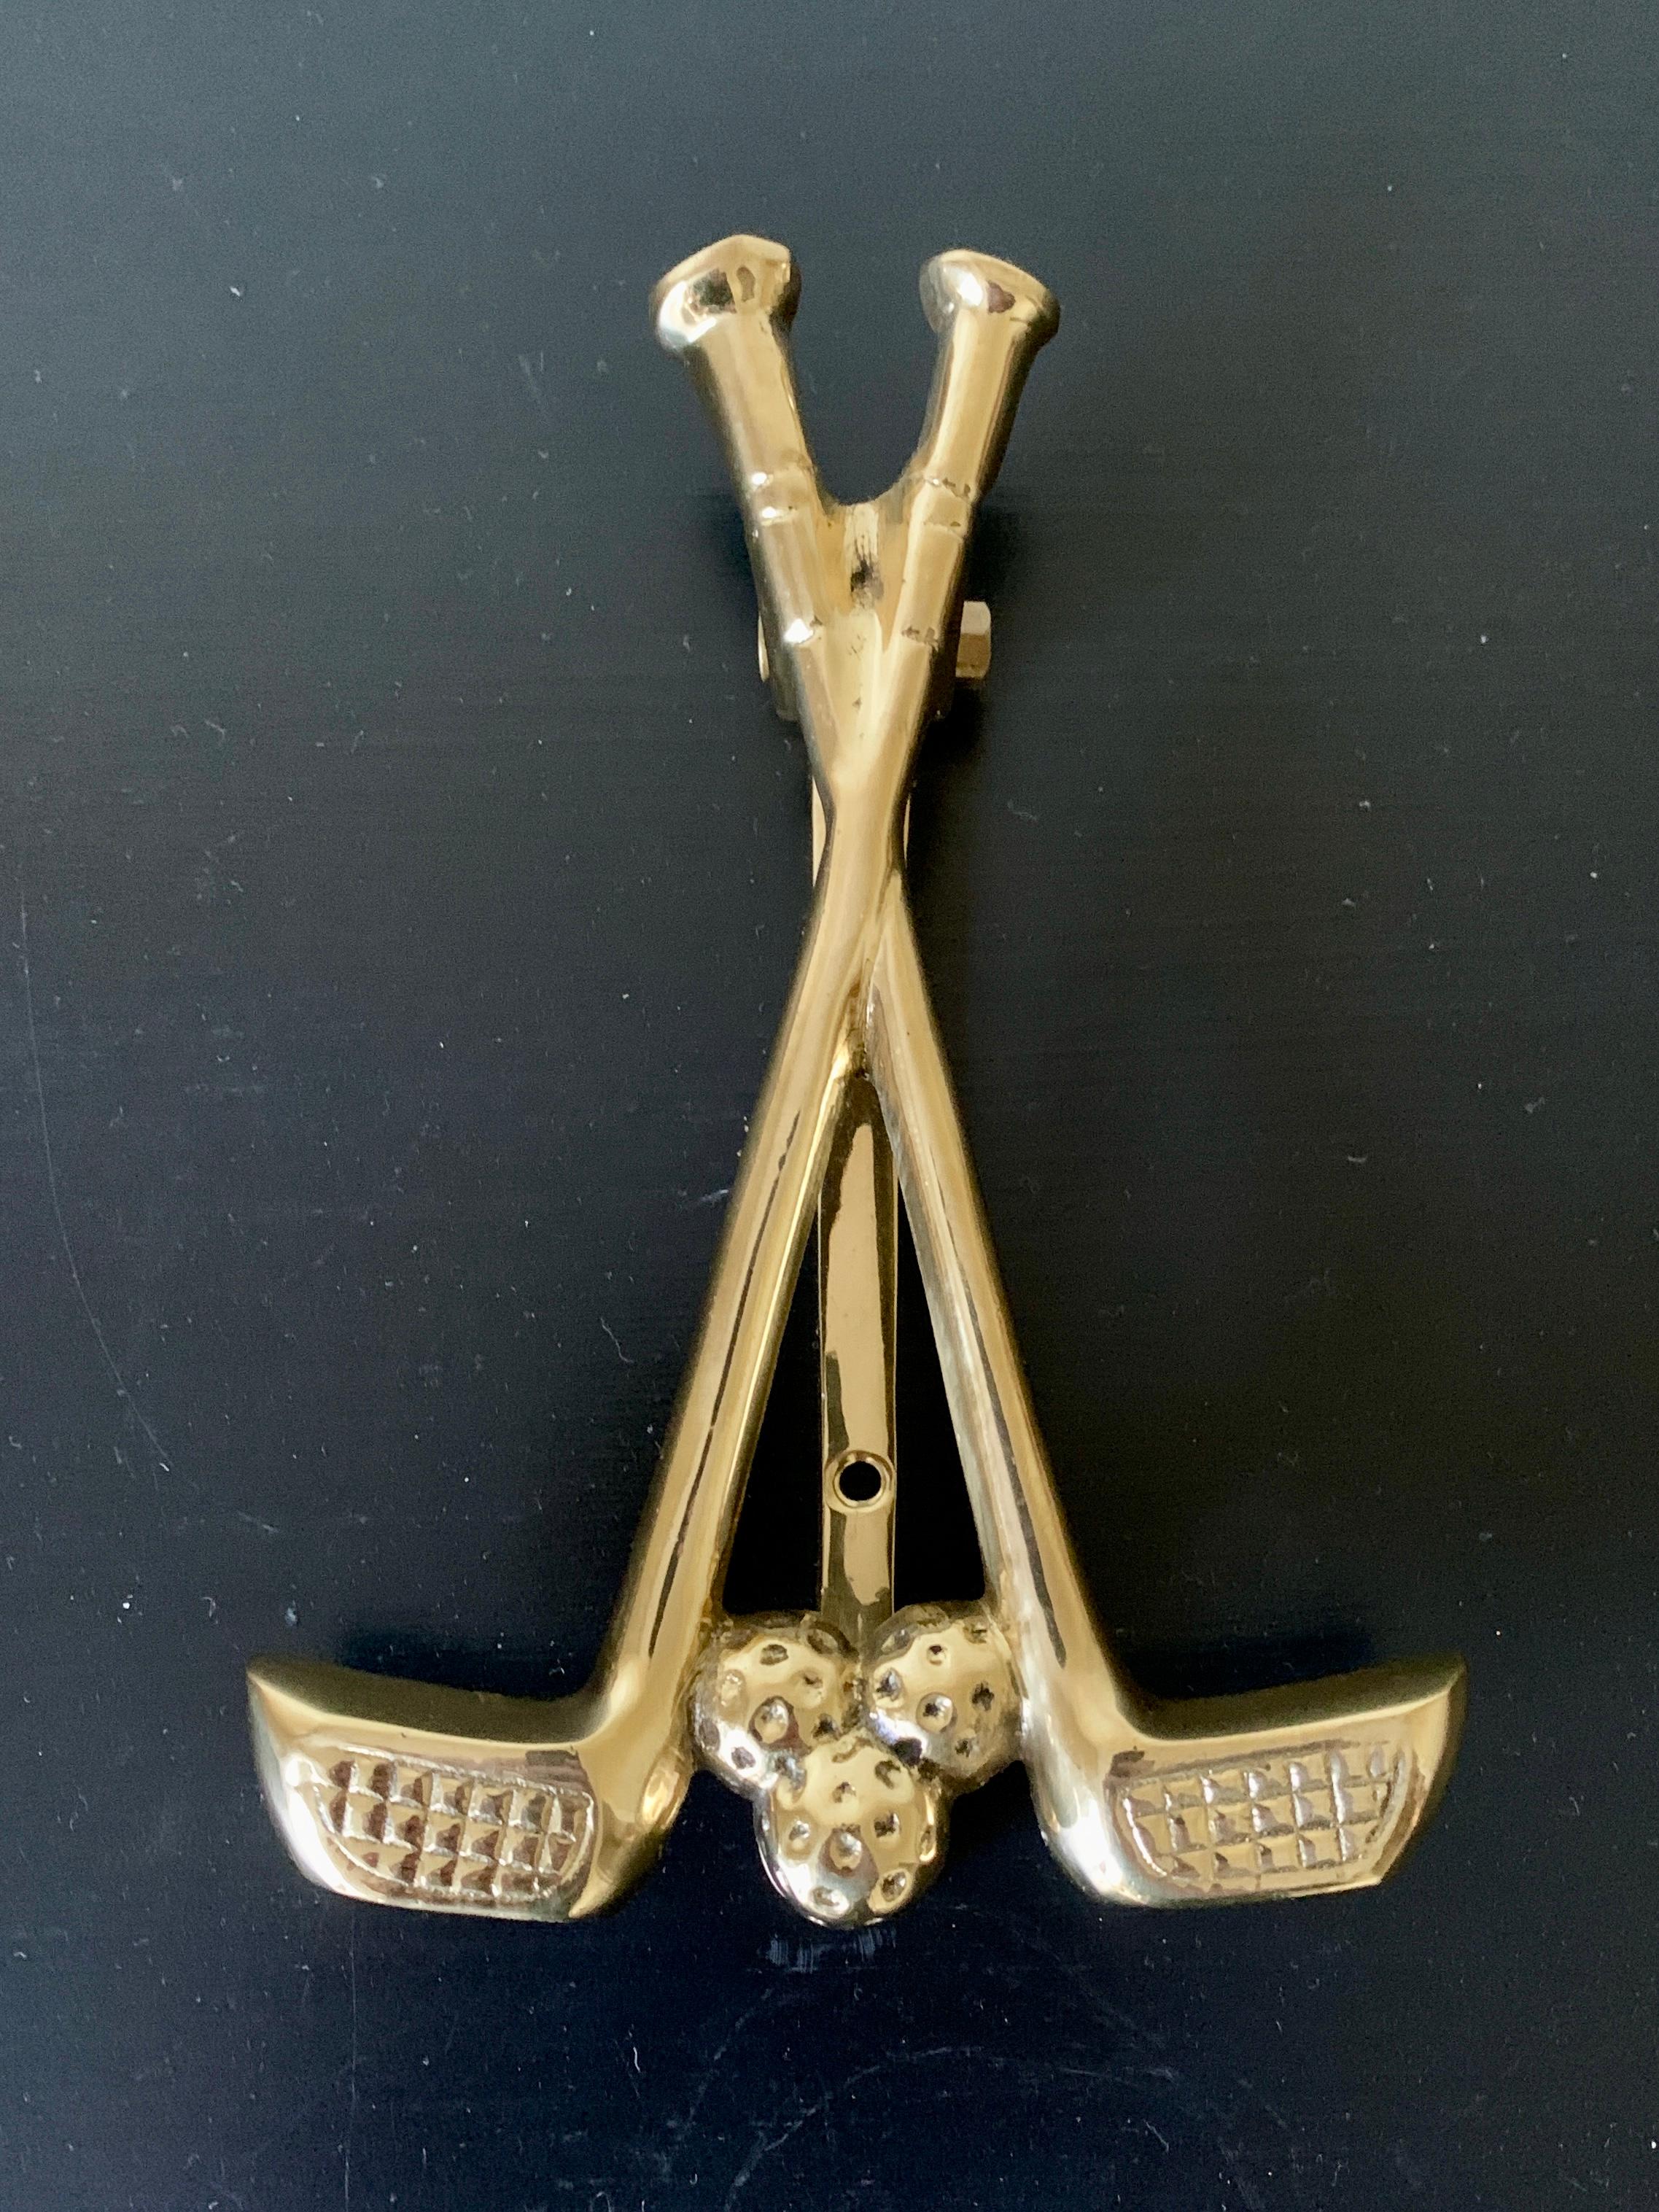 A beautiful cast brass door knocker in the form of two golf clubs and a golf balls.

USA, Mid-20th Century

Measures: 4.5